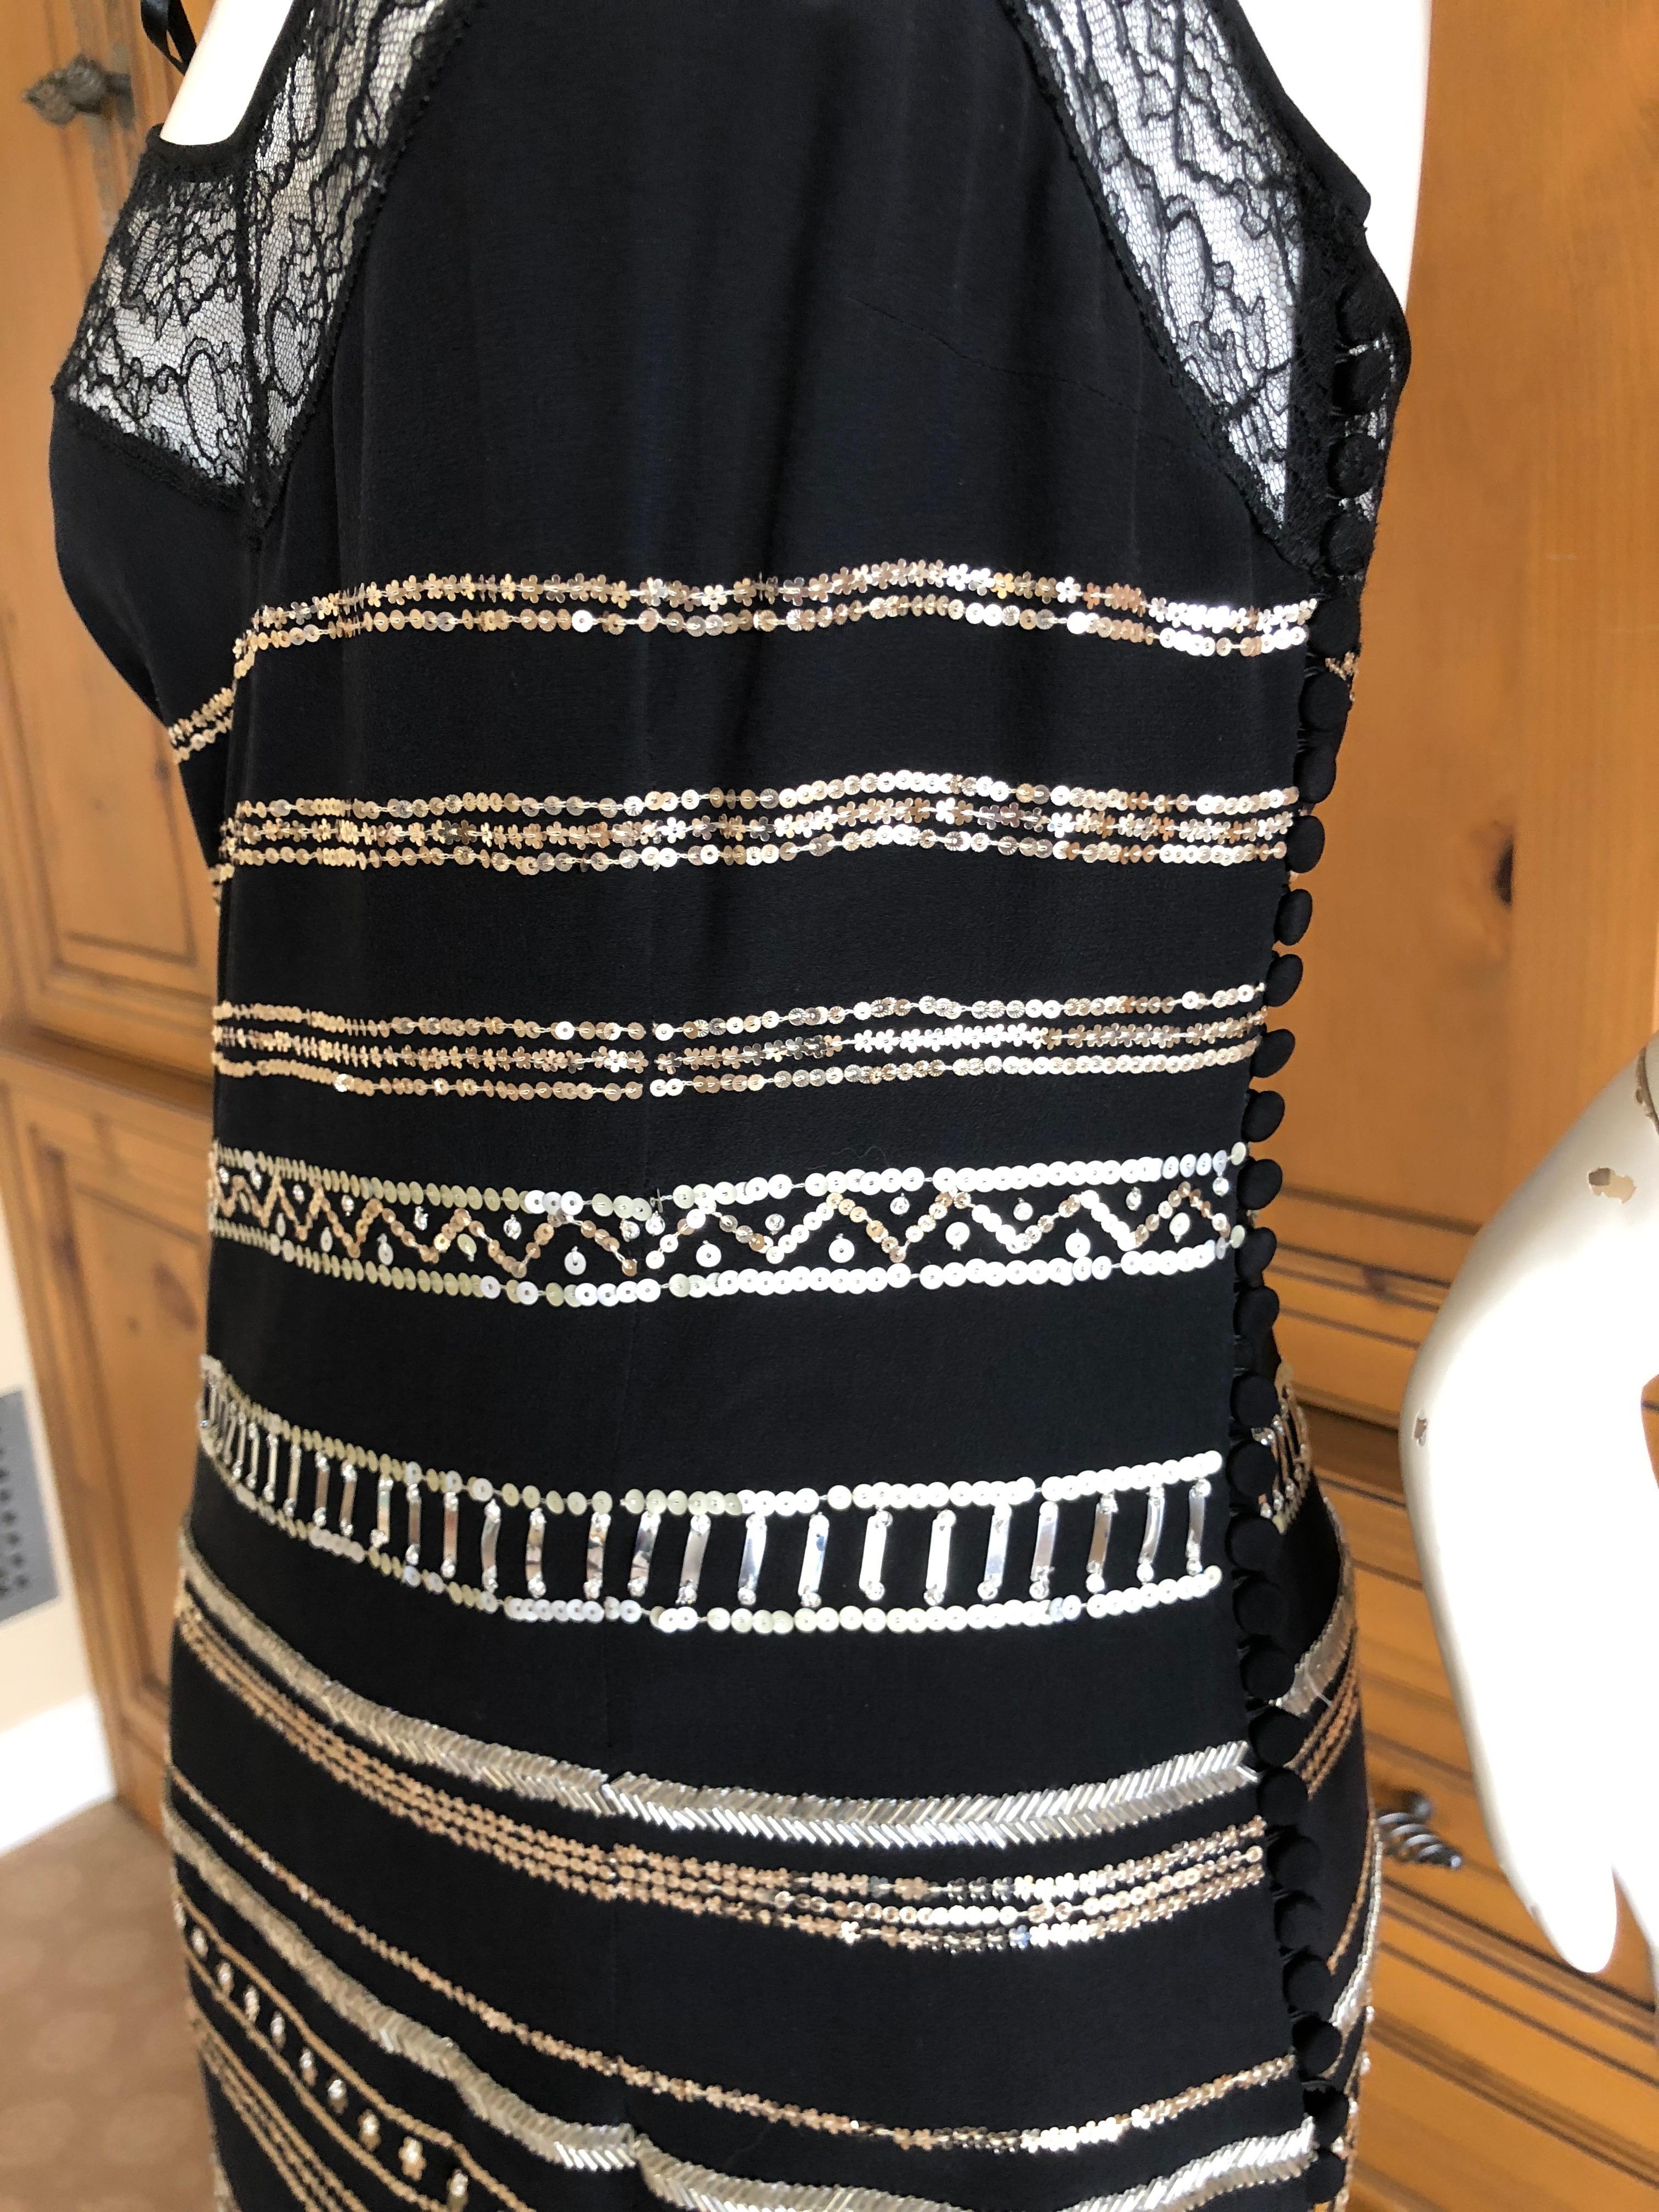 Christian Dior John Galliano's 2nd Dior Collection Assuit Flapper Dress, 1998 In Excellent Condition For Sale In Cloverdale, CA